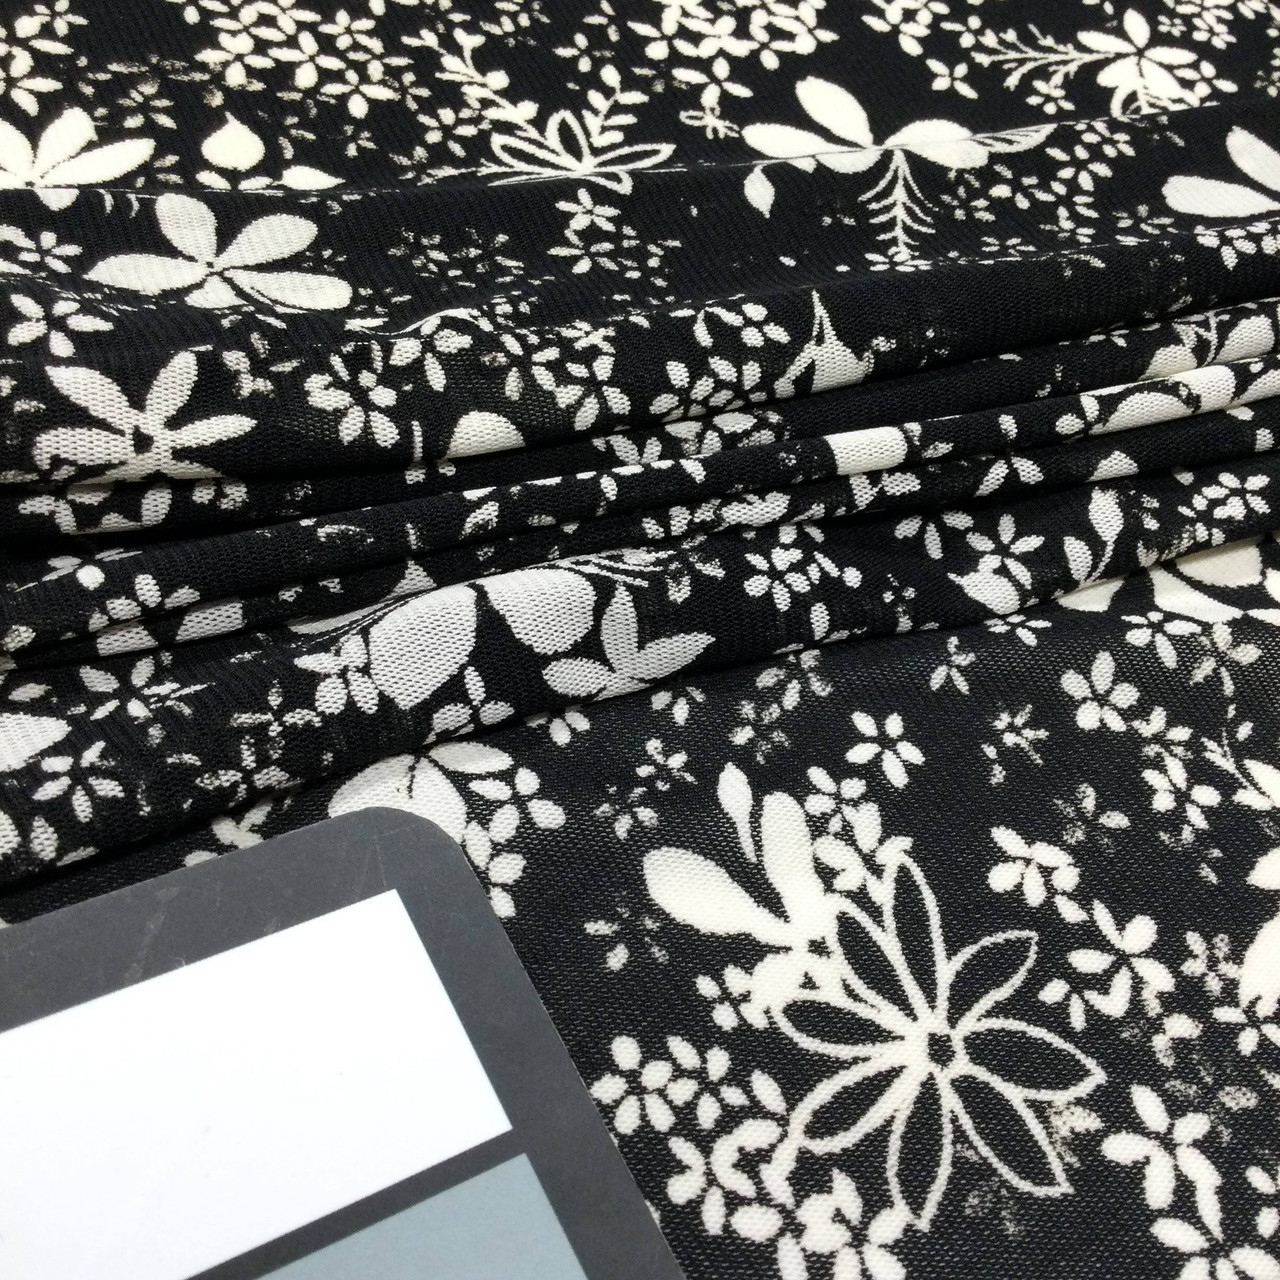 Black and White Floral Print Mesh Fabric, Stretch Sheer Lightweight